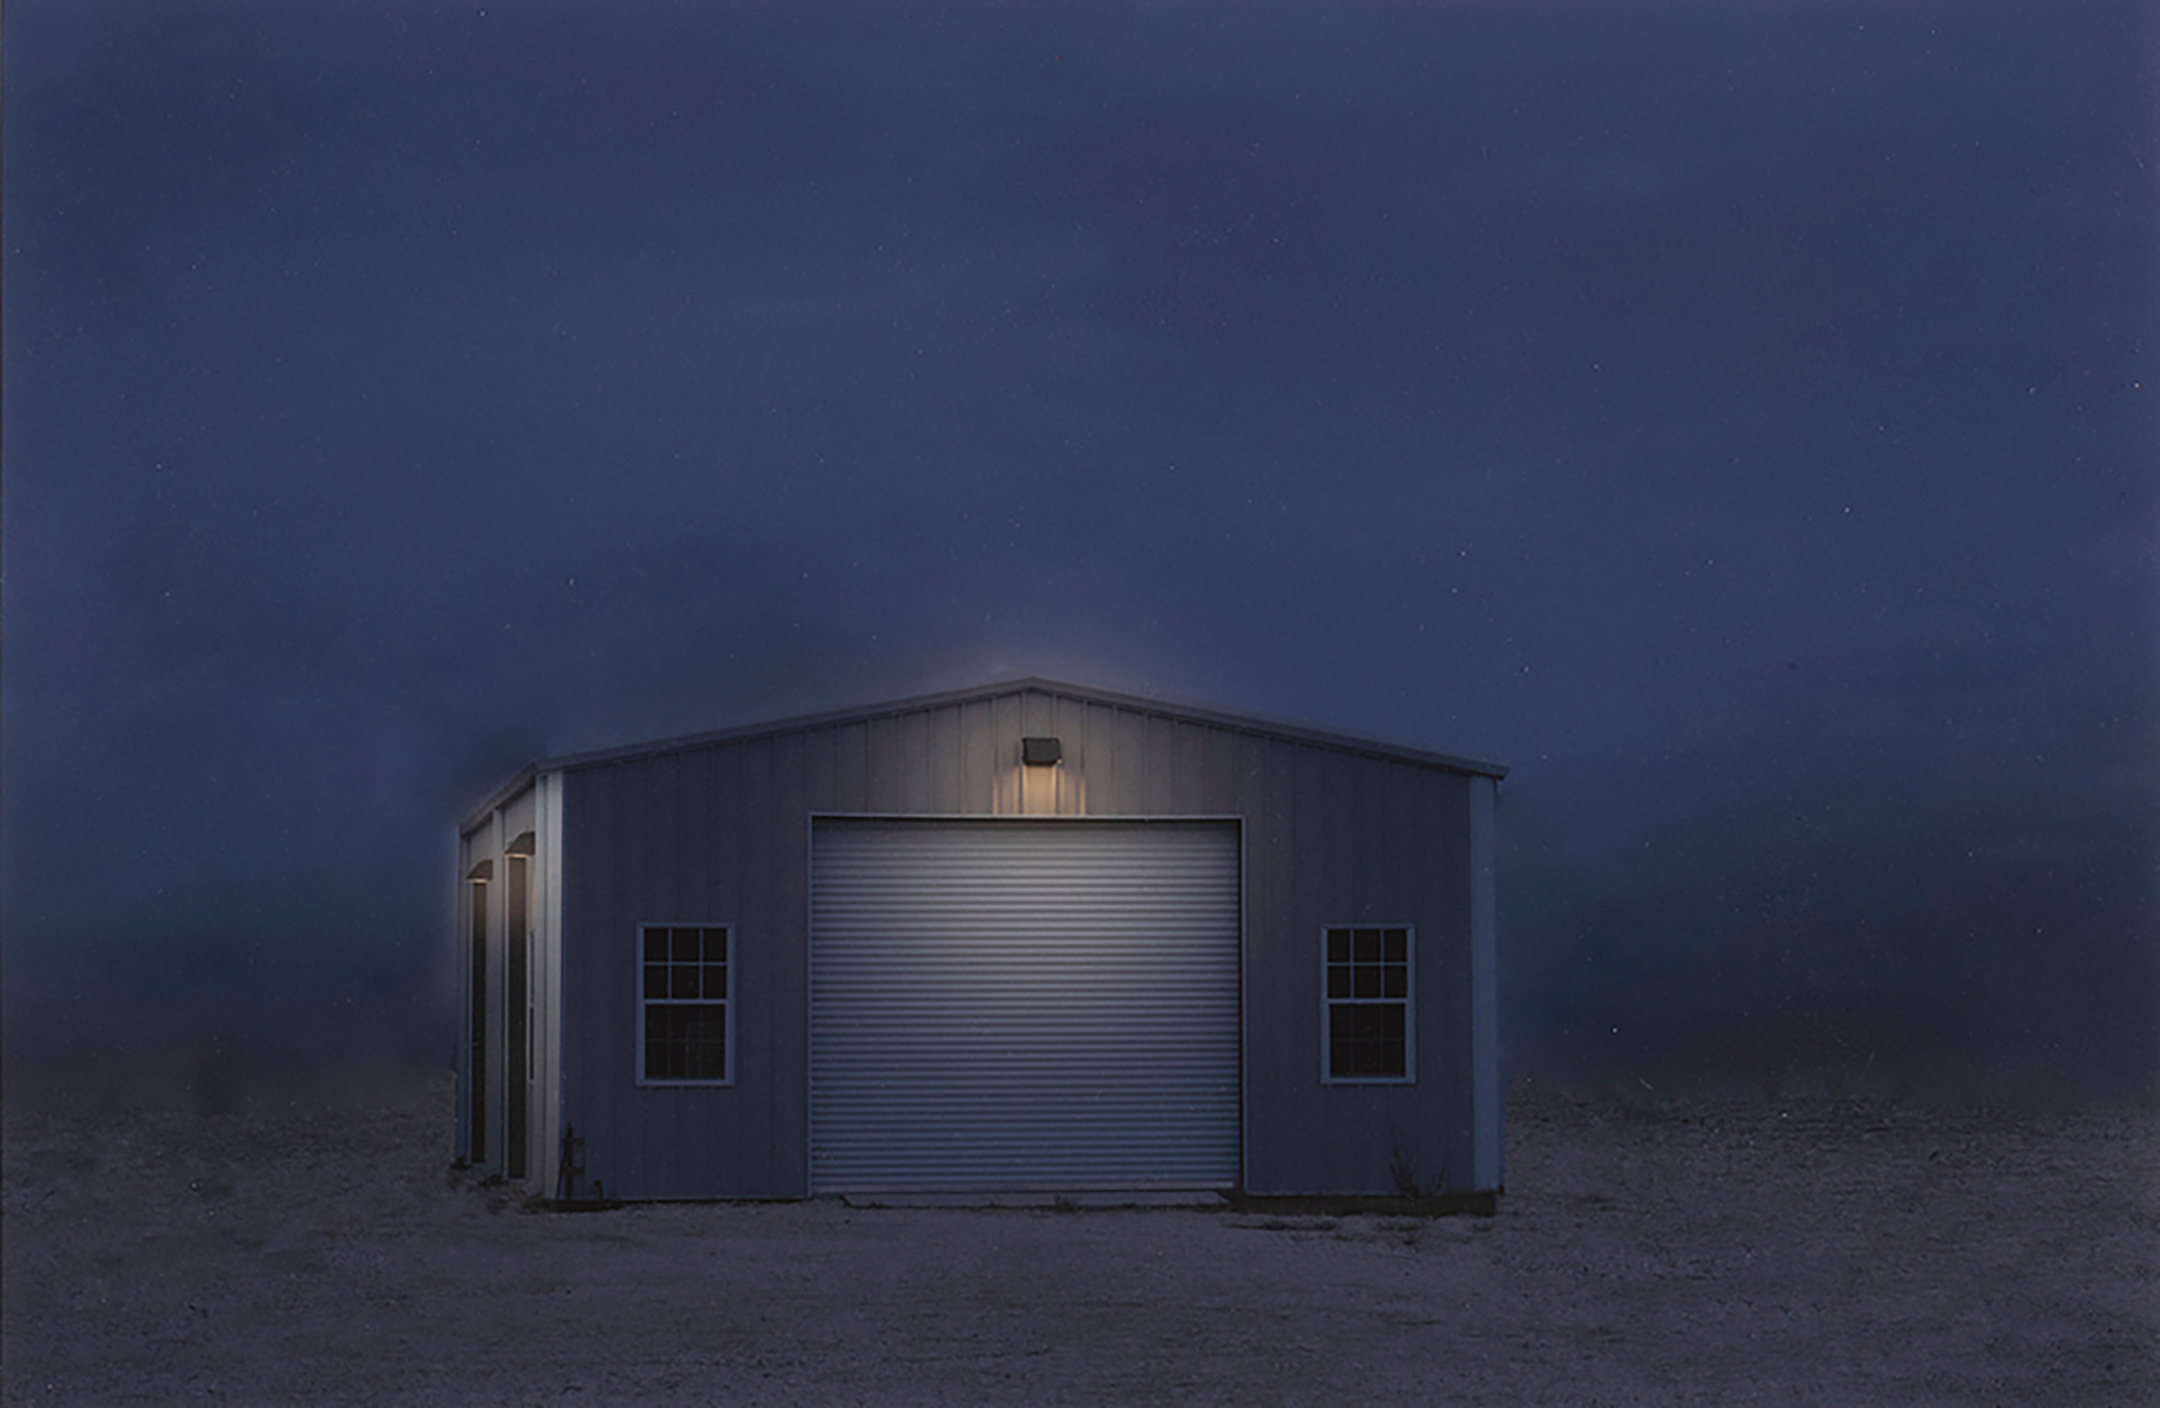 A photograph taken at twilight of a solitary single-story beige shed with a slightly pitched roof and a large, closed garage door and two small windows on either side illuminated by a small lamp hanging above the door 